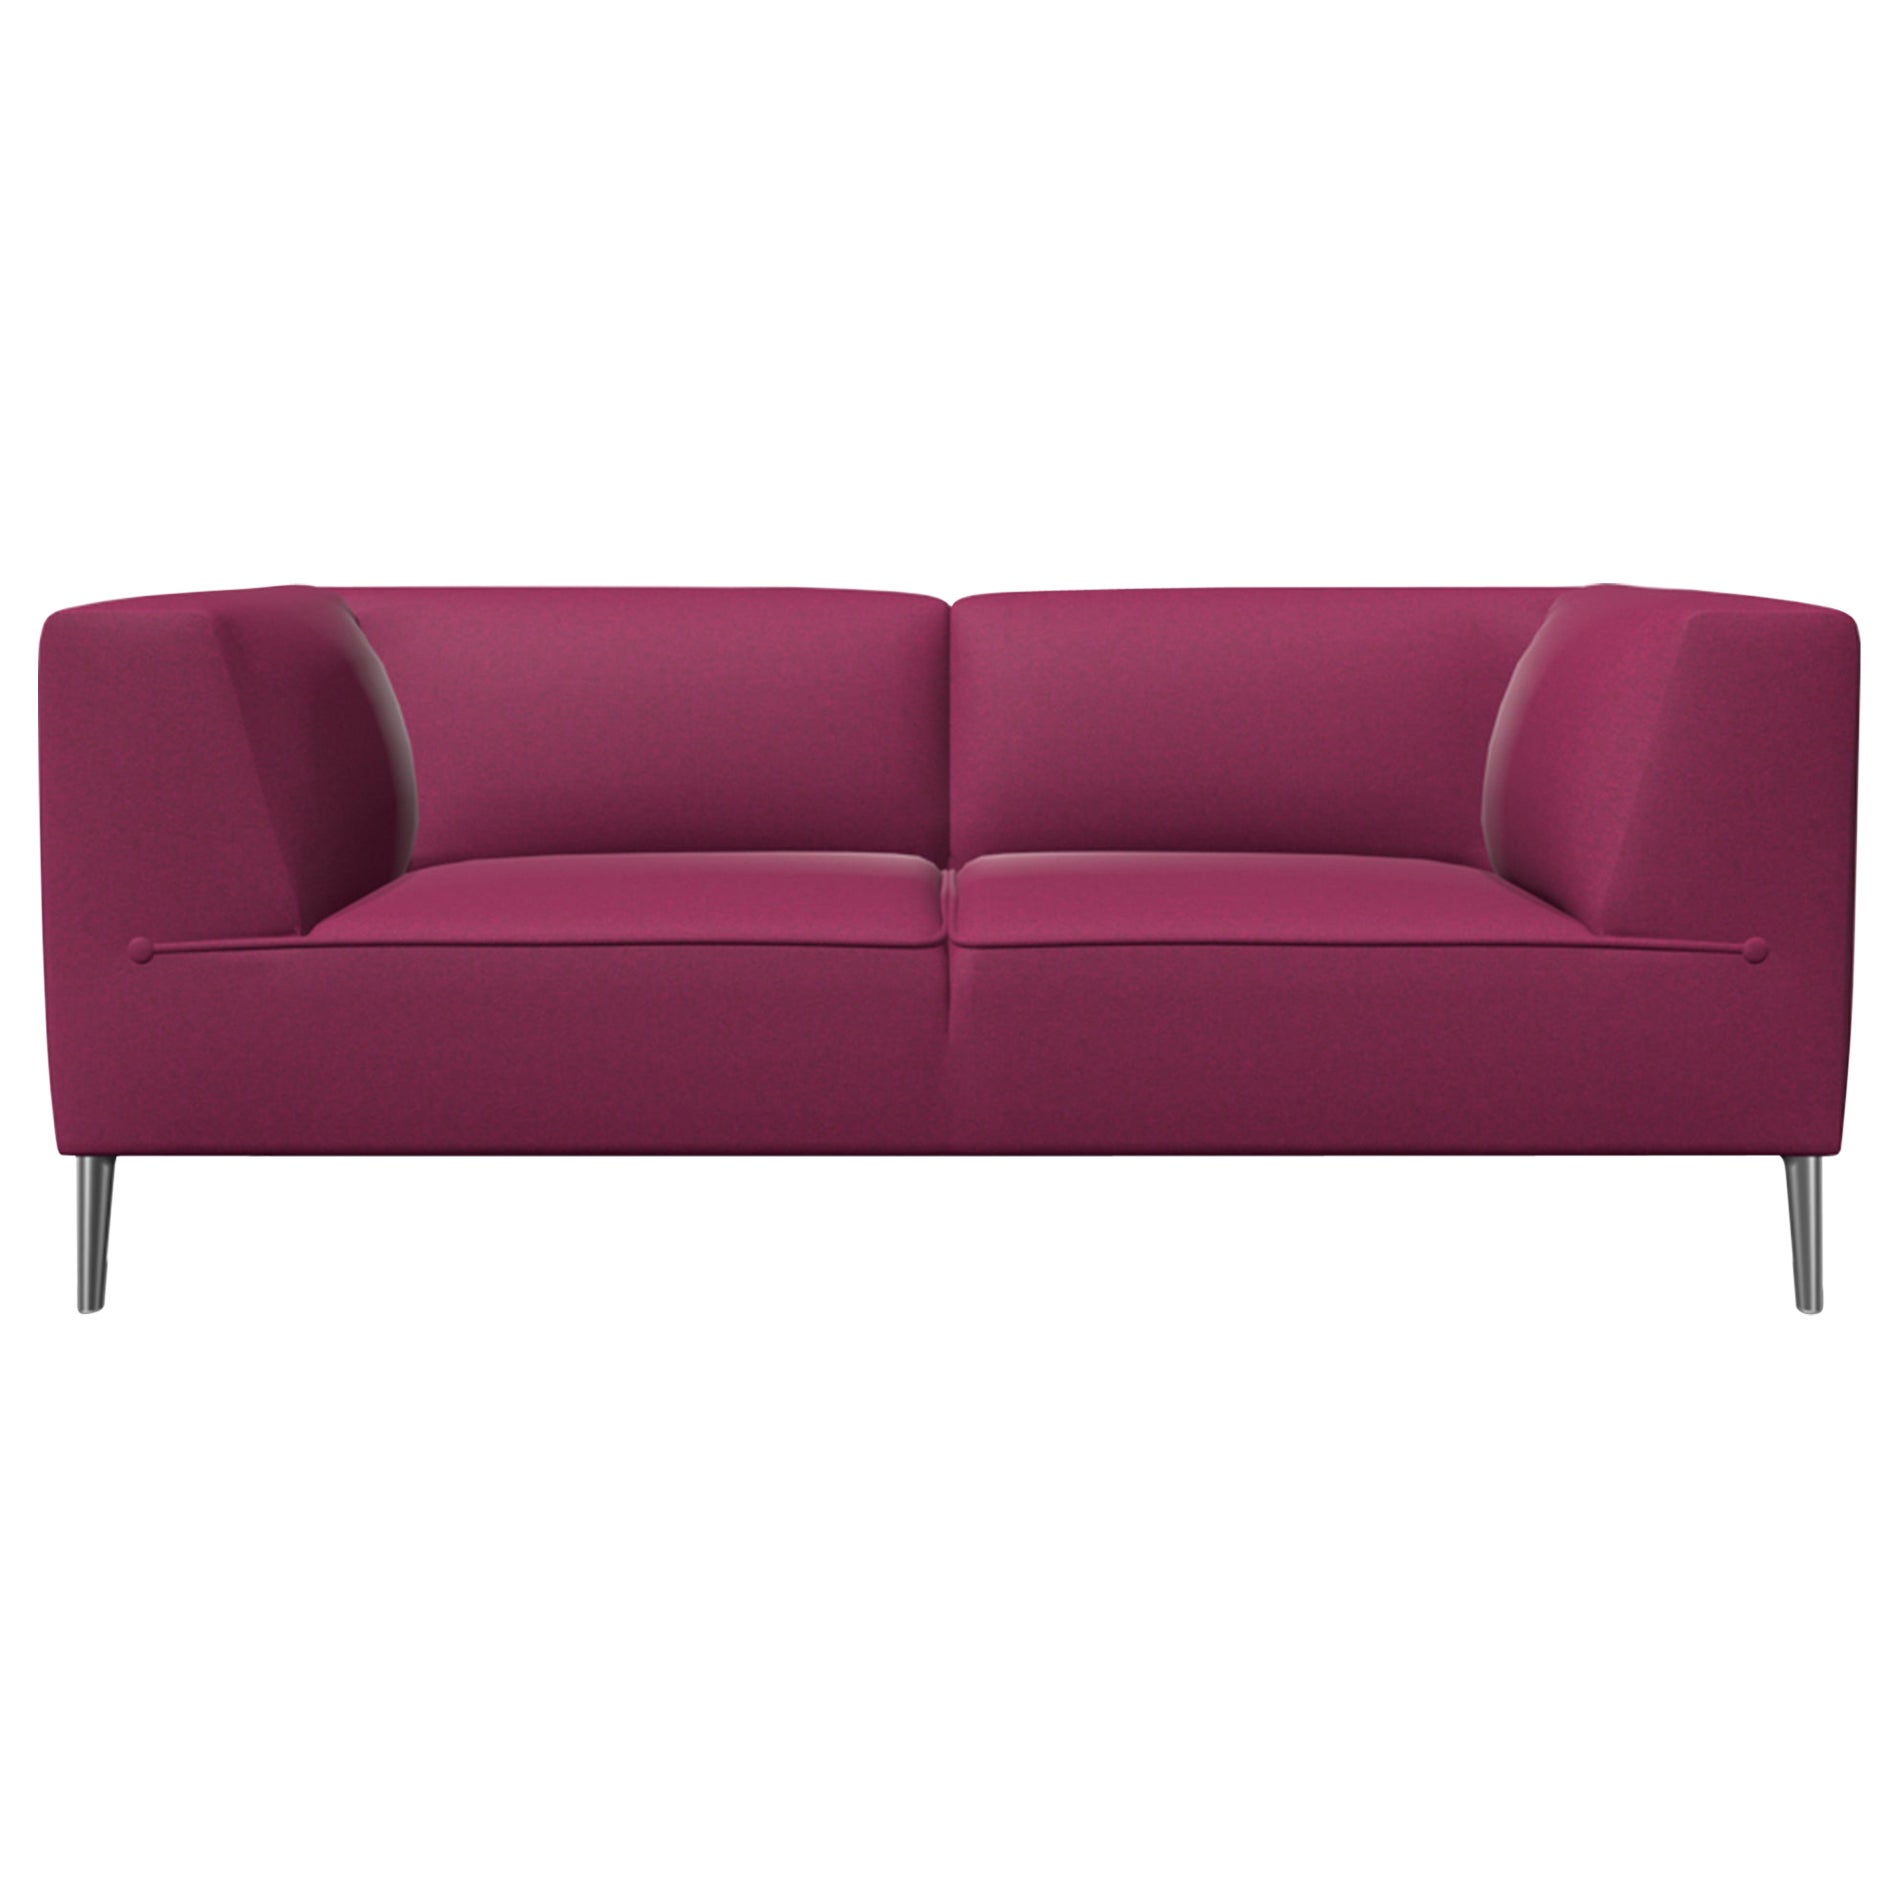 Moooi Double Seat Sofa So Good in Divina Upholstery with Polished Aluminum Feet